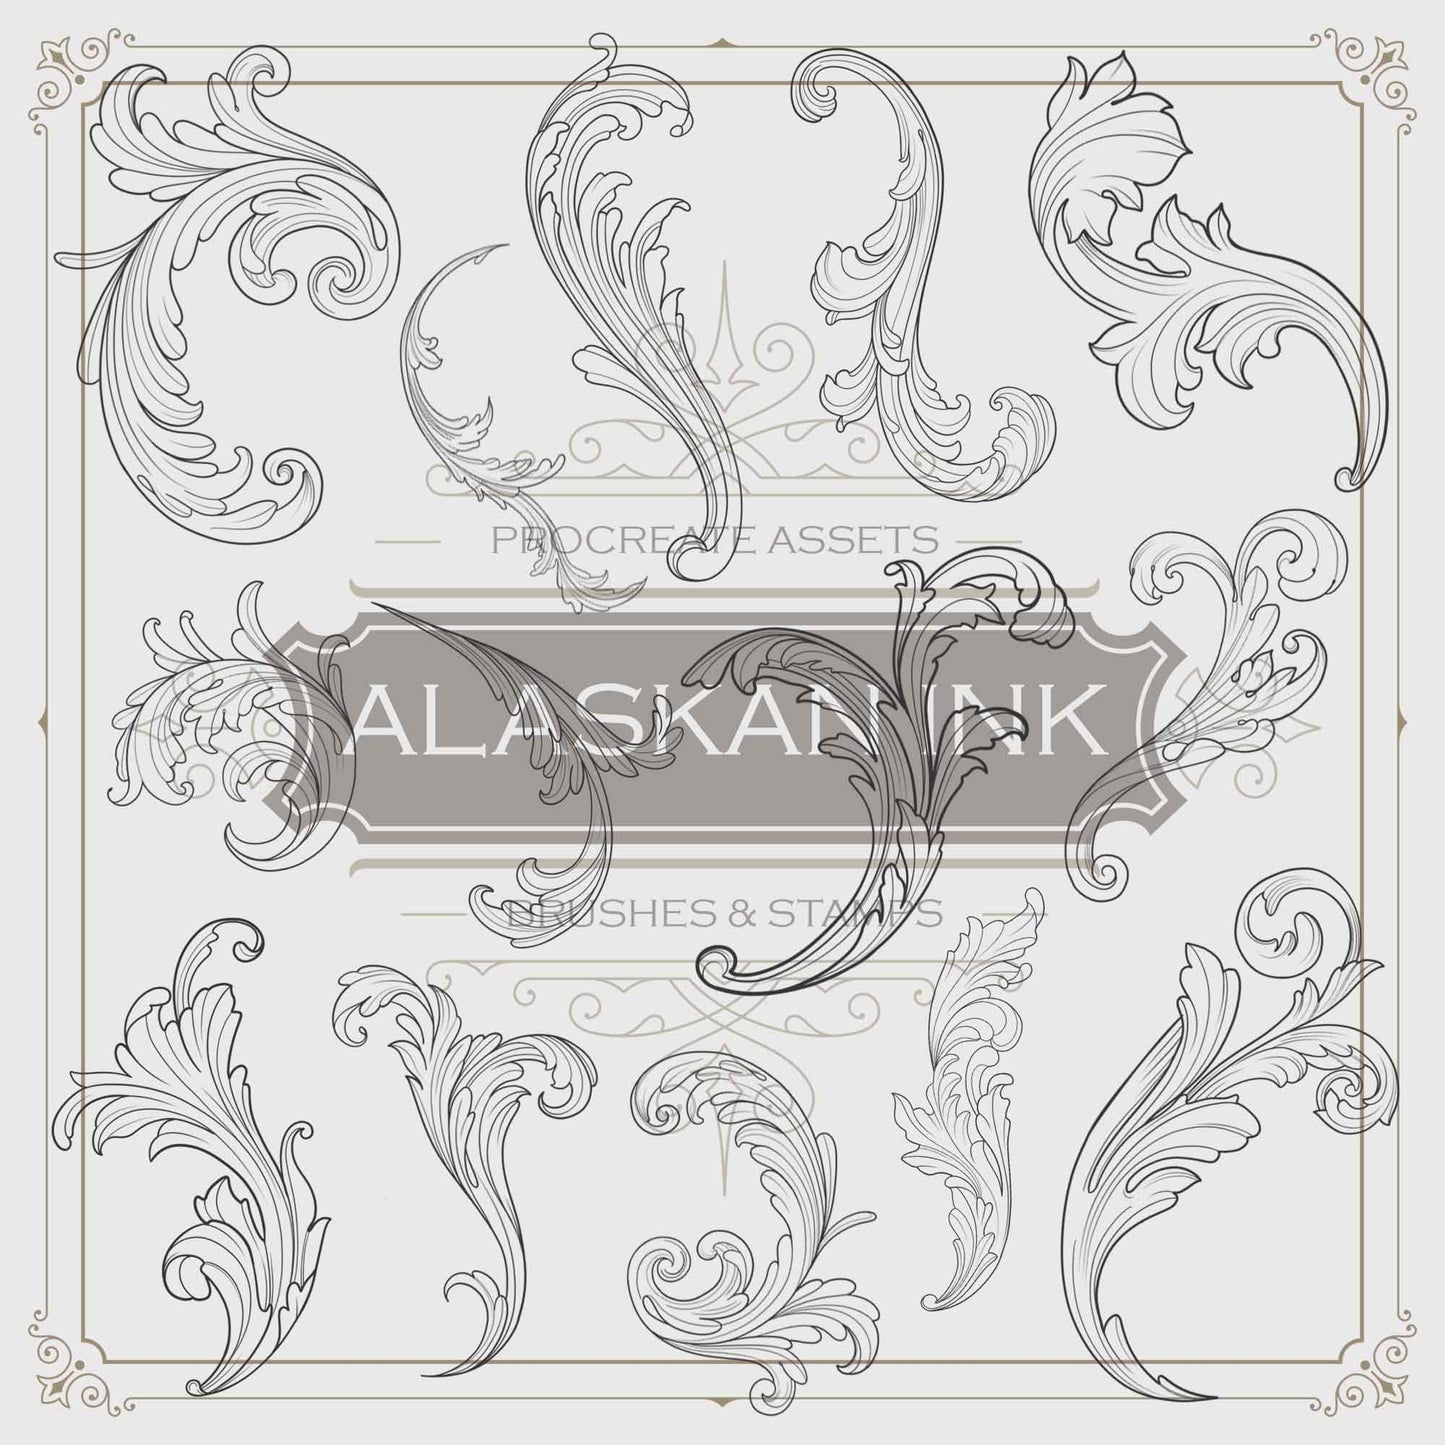 50 Acanthus Ornaments Tattoo Brushes for Procreate Application created by Alaskan ink